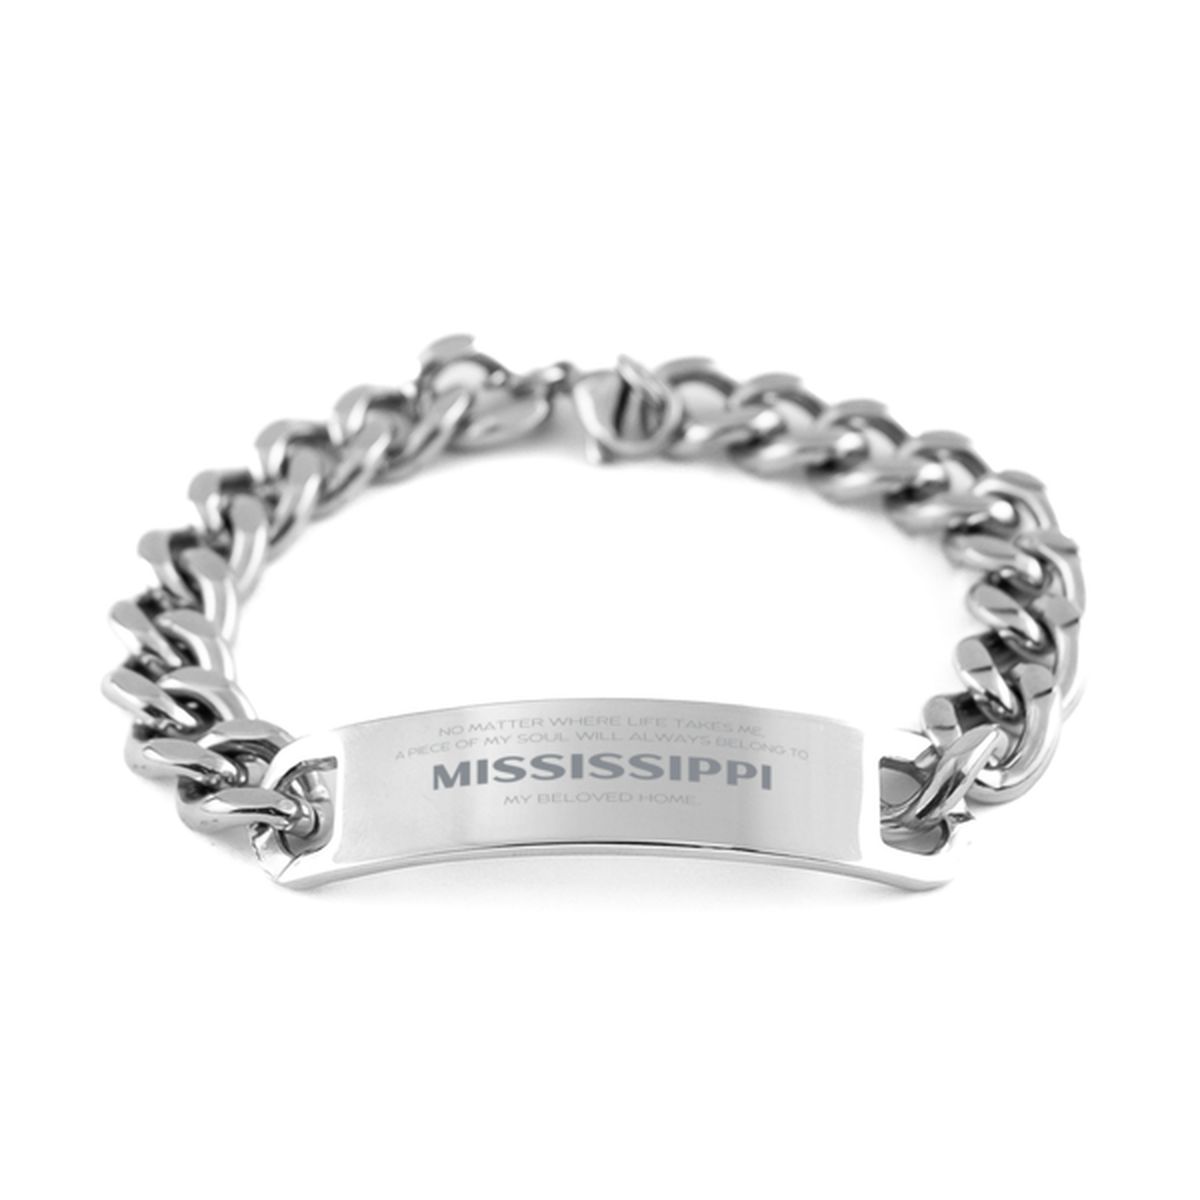 Love Mississippi State Gifts, My soul will always belong to Mississippi, Proud Cuban Chain Stainless Steel Bracelet, Birthday Unique Gifts For Mississippi Men, Women, Friends